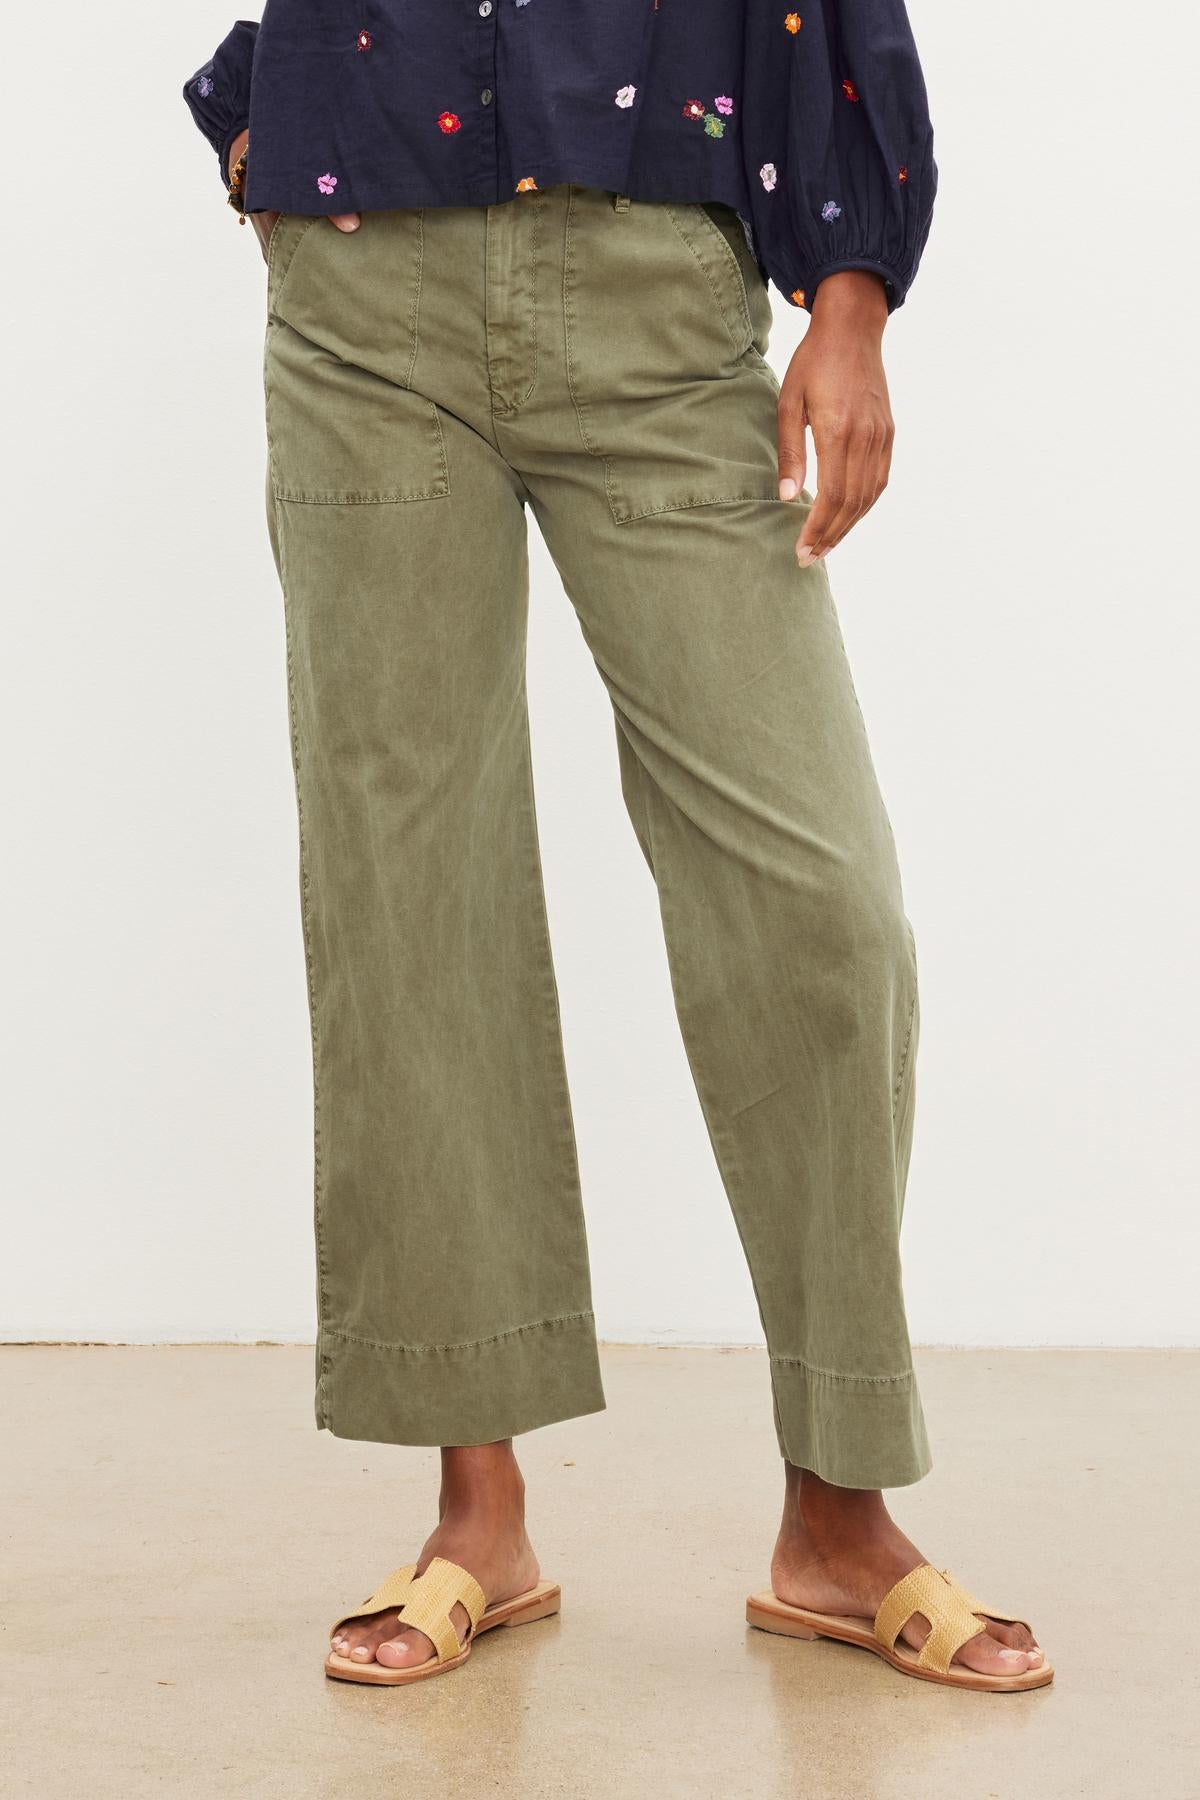   Person standing in Velvet by Graham & Spencer's MYA COTTON CANVAS PANT and sandals, with a focus on the lower half of their body against a neutral background. 